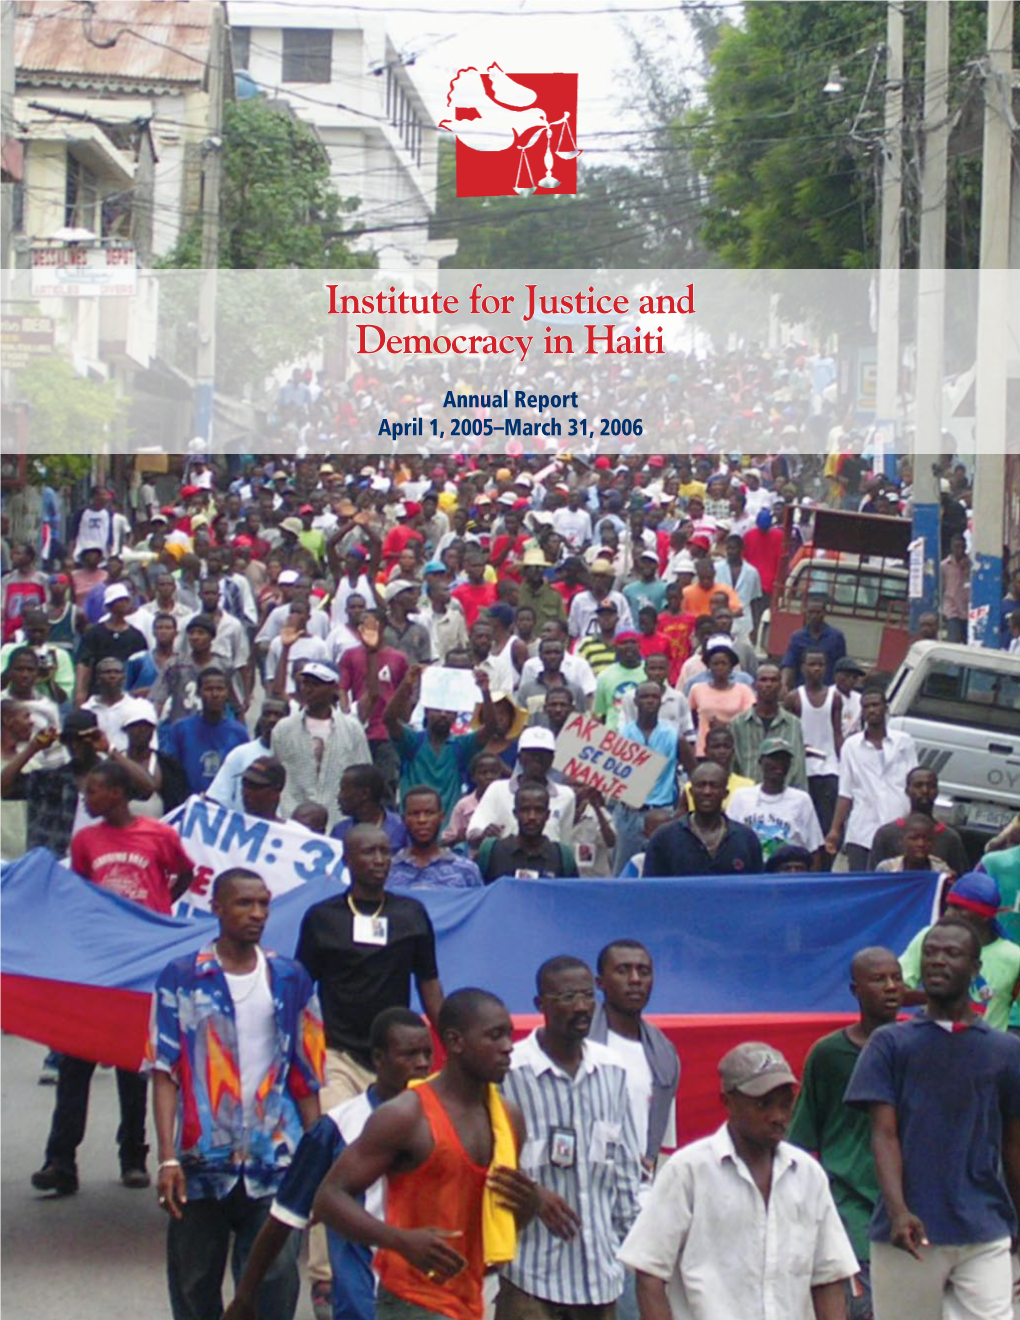 Institute for Justice and Democracy in Haiti